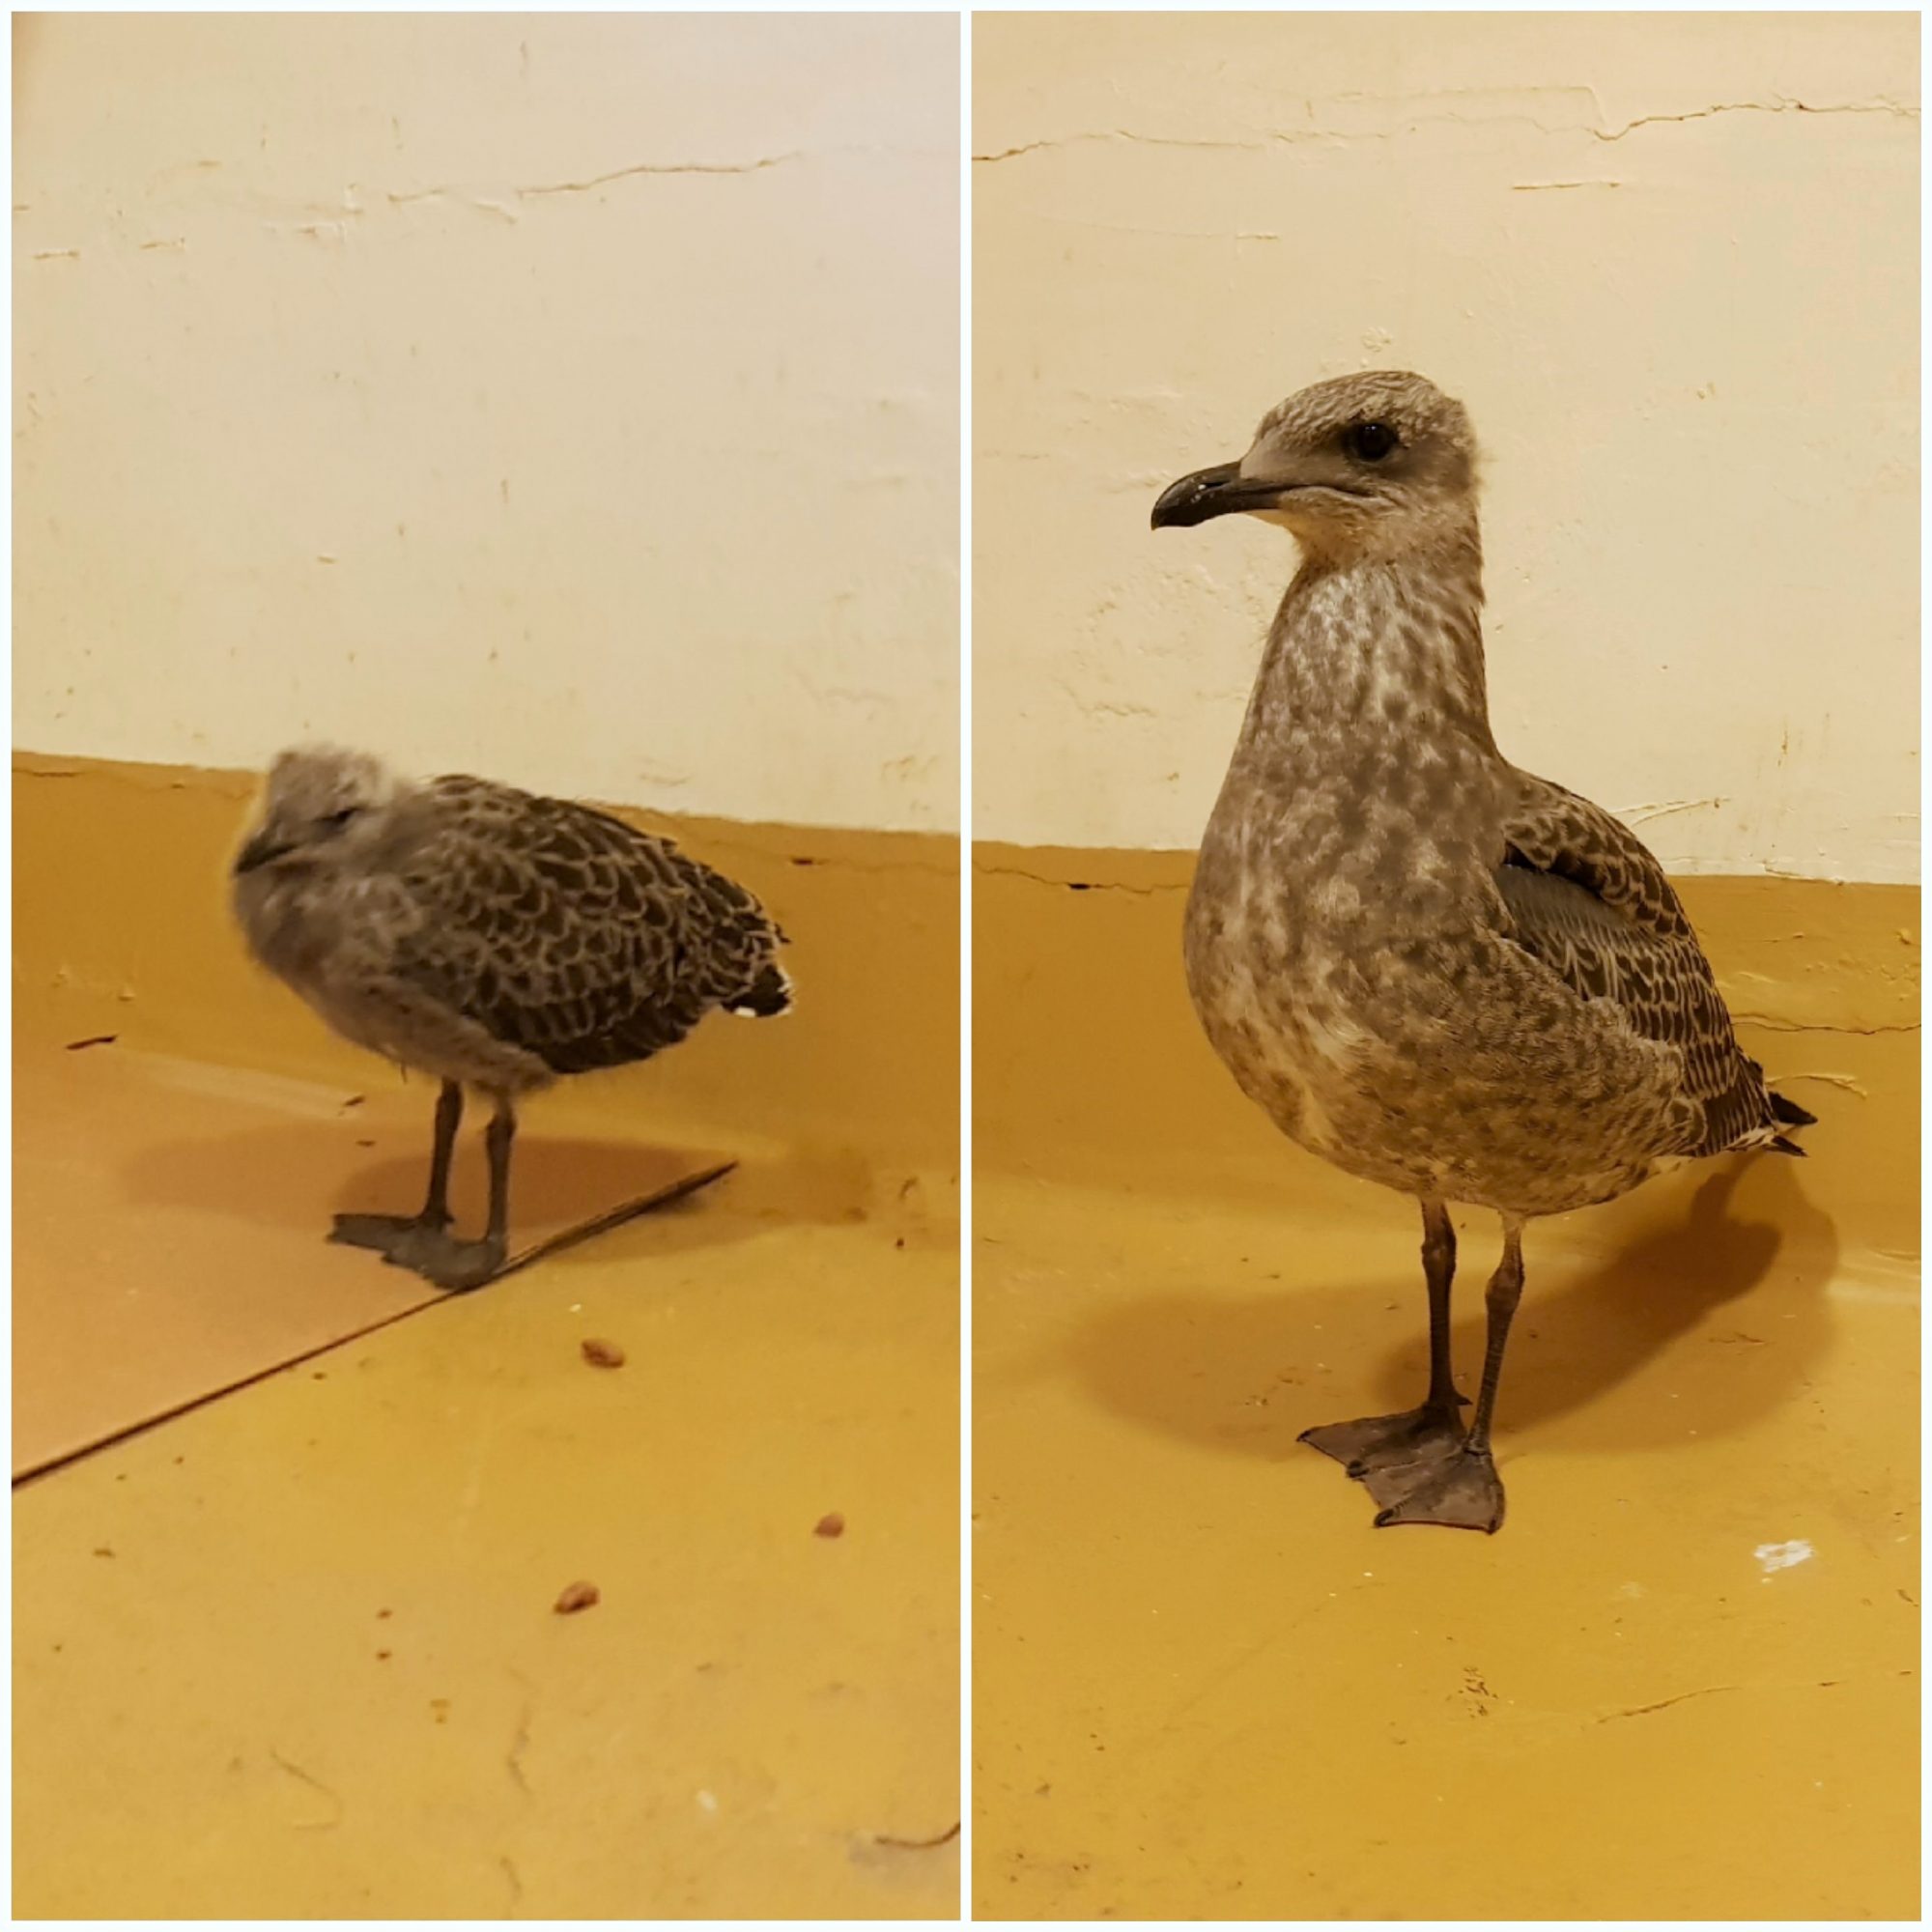 A photo of Otto, the baby herring gull, at age 2 or 3 weeks old, versus 5 or 6 weeks old.